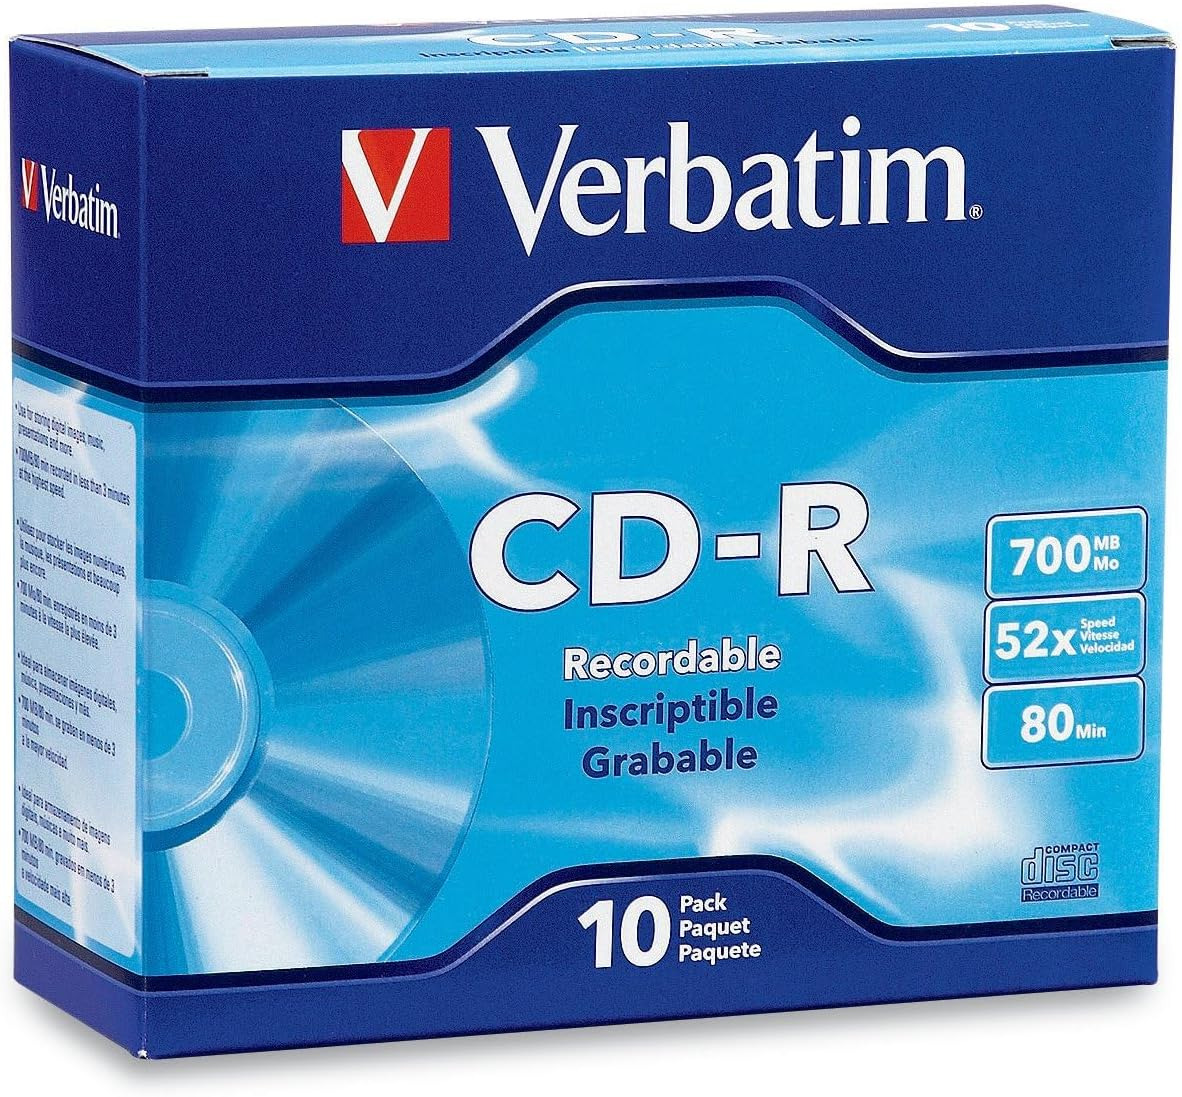 Verbatim CD-R Blank Discs 700MB 80-Minutes 52X Recordable Disc for Data and Musi